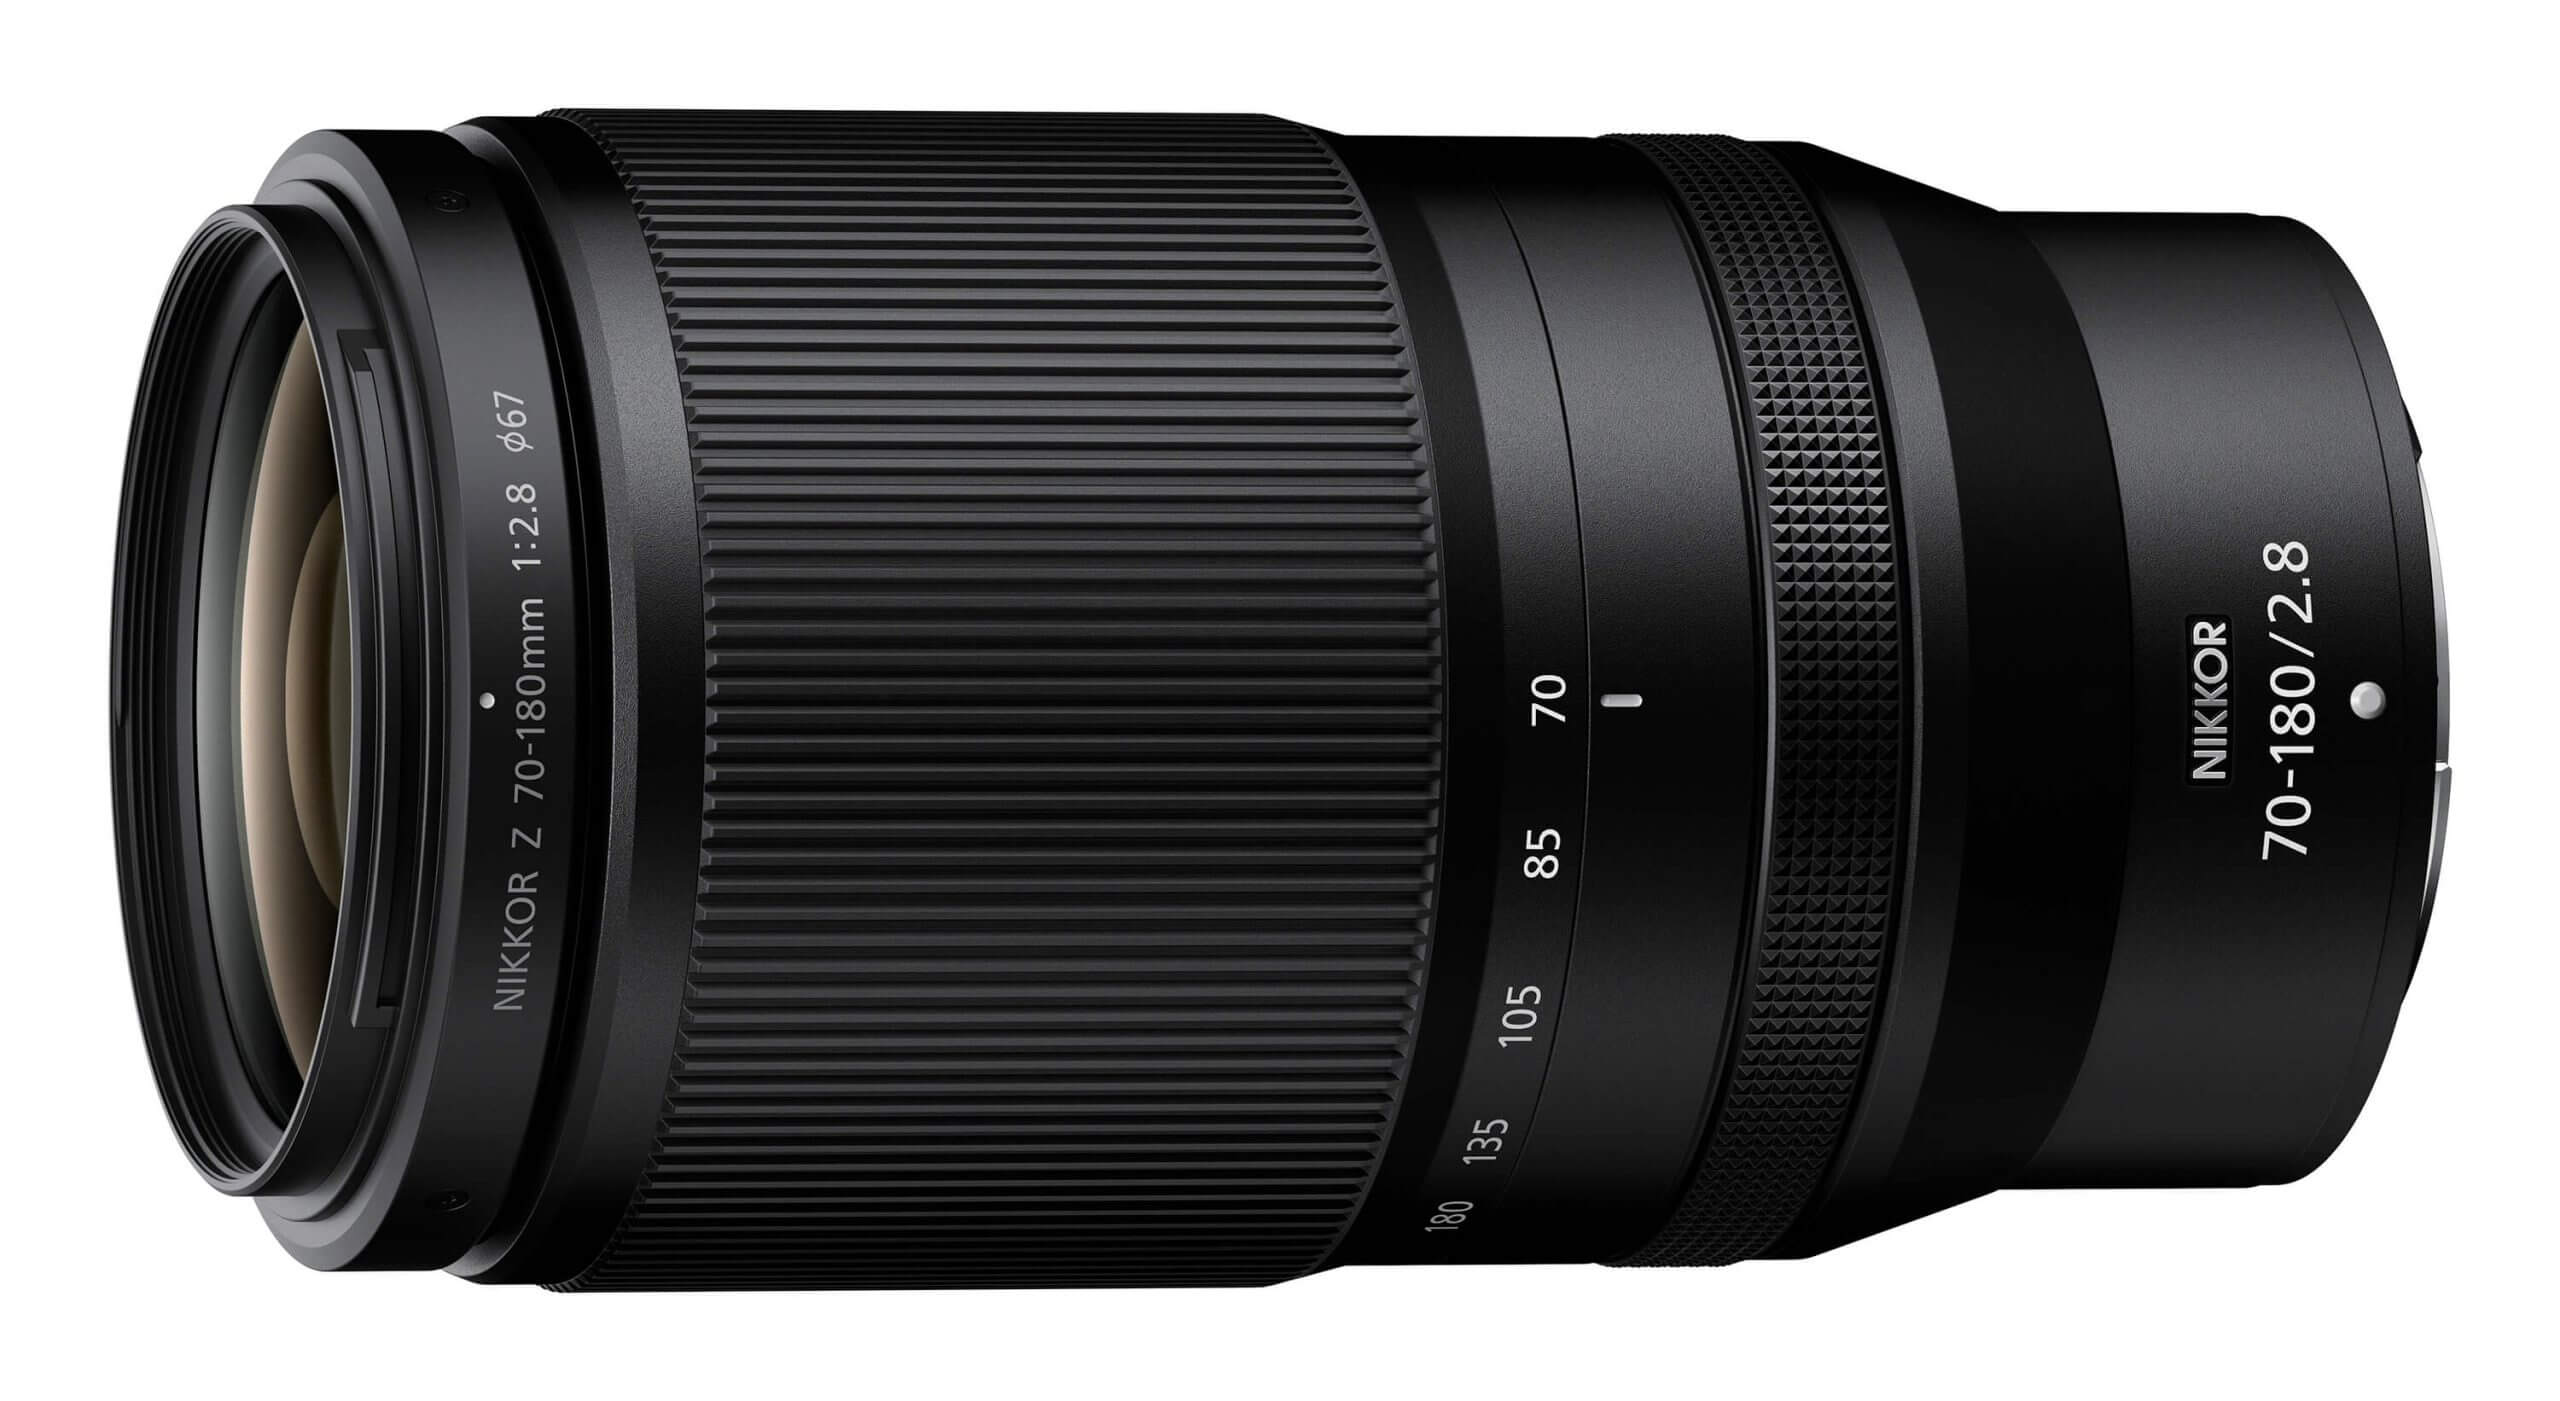 Z70 180 2.8 angle1.high  scaled - Nikon officially announces the Z 180-600mm F/5.6-6.3 VR and Z 70-180mm f/2.8